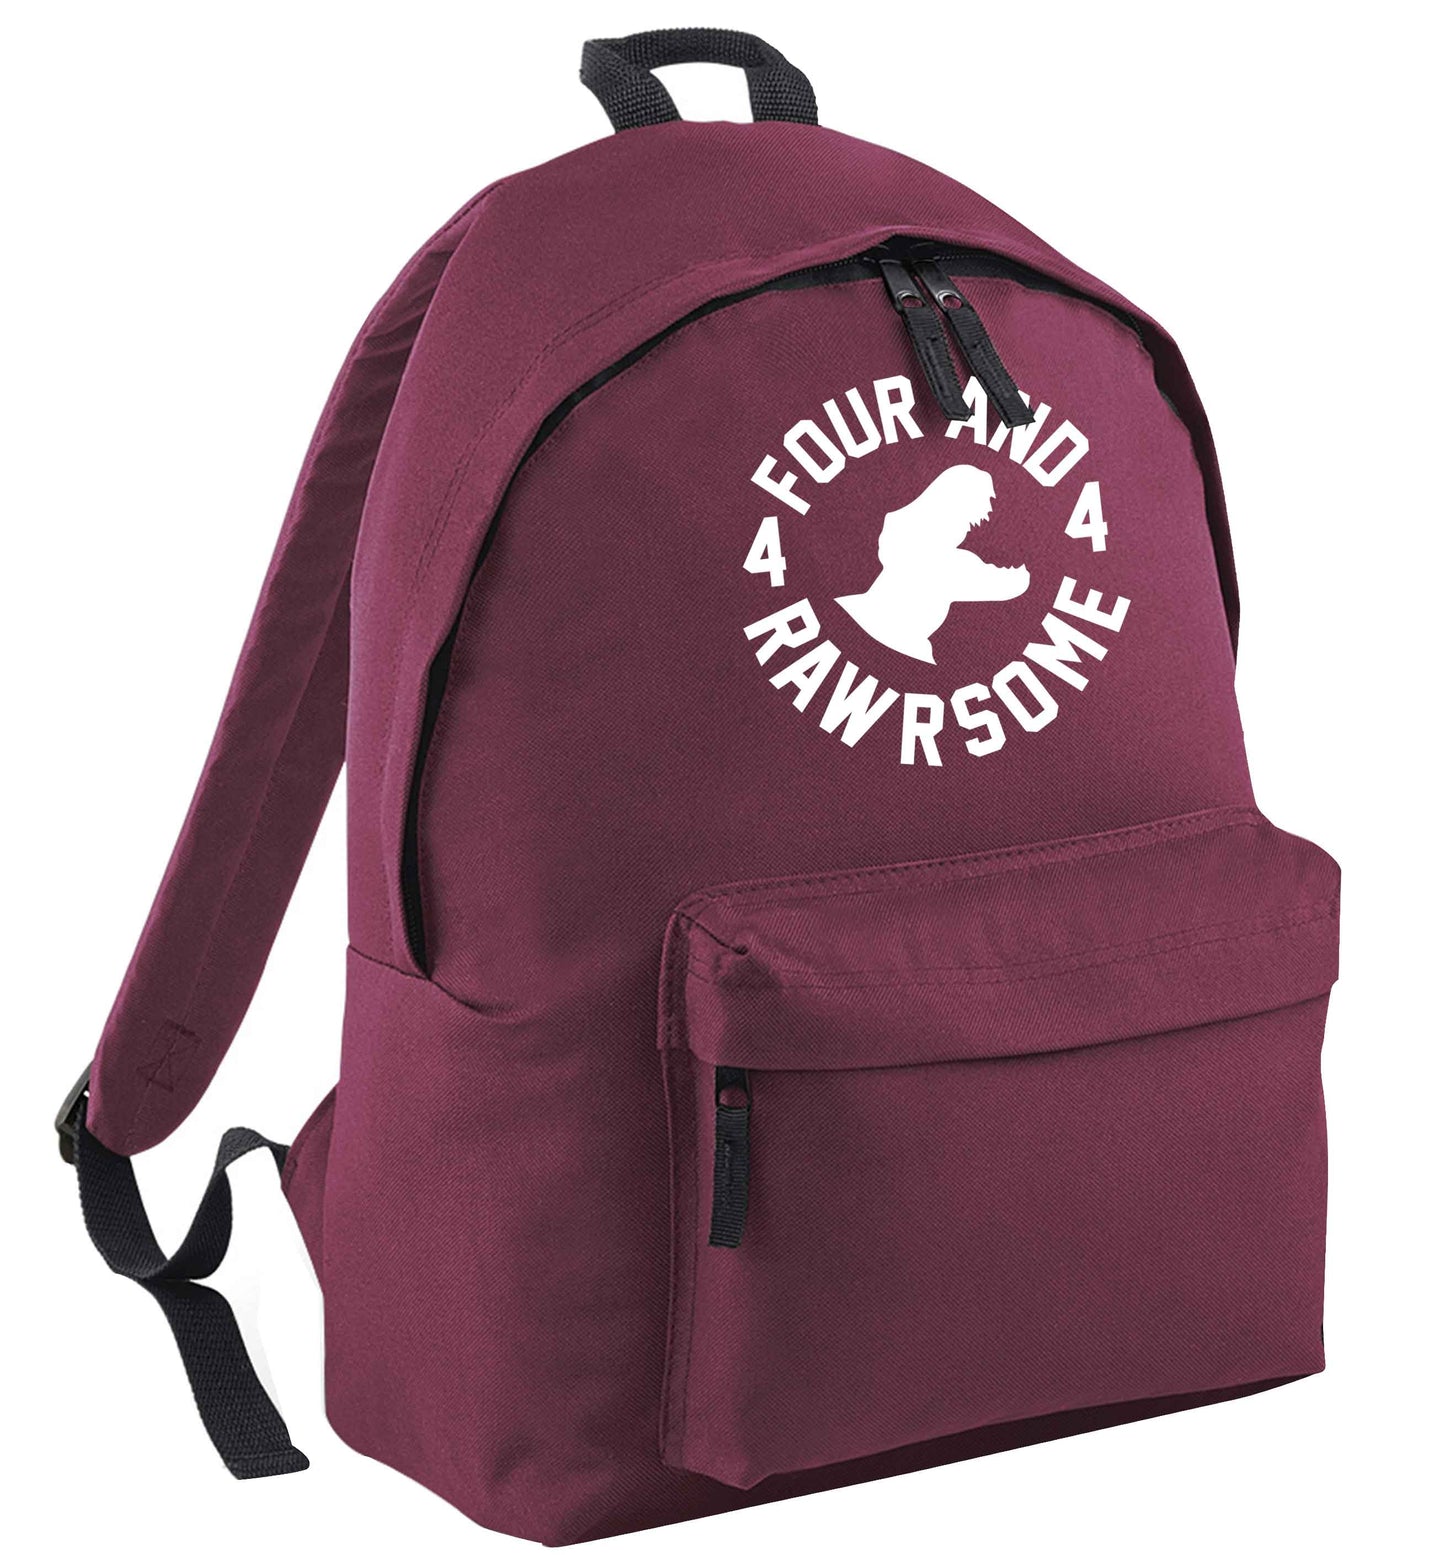 Four and rawrsome black adults backpack